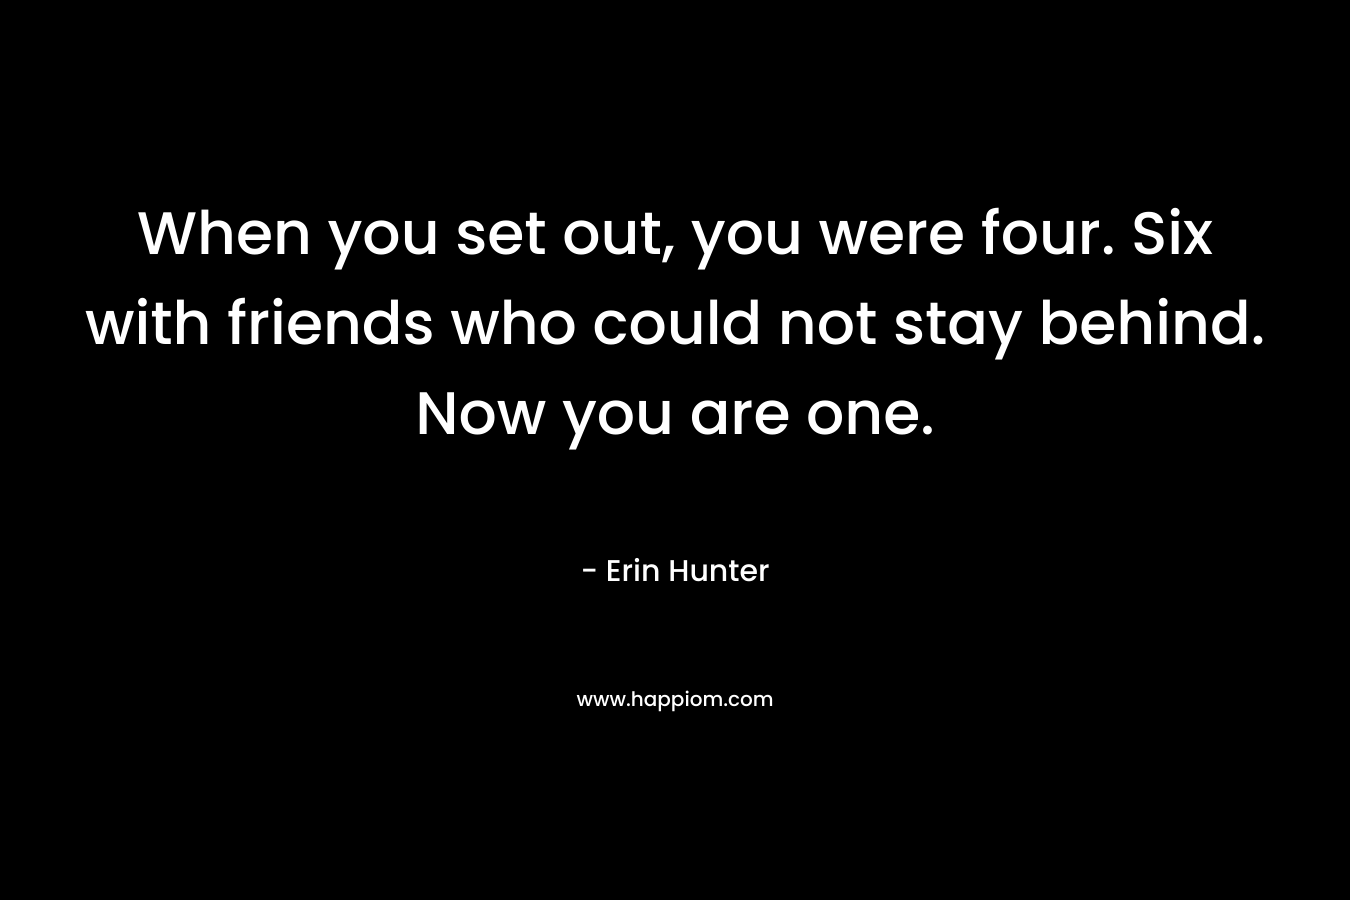 When you set out, you were four. Six with friends who could not stay behind. Now you are one. – Erin Hunter